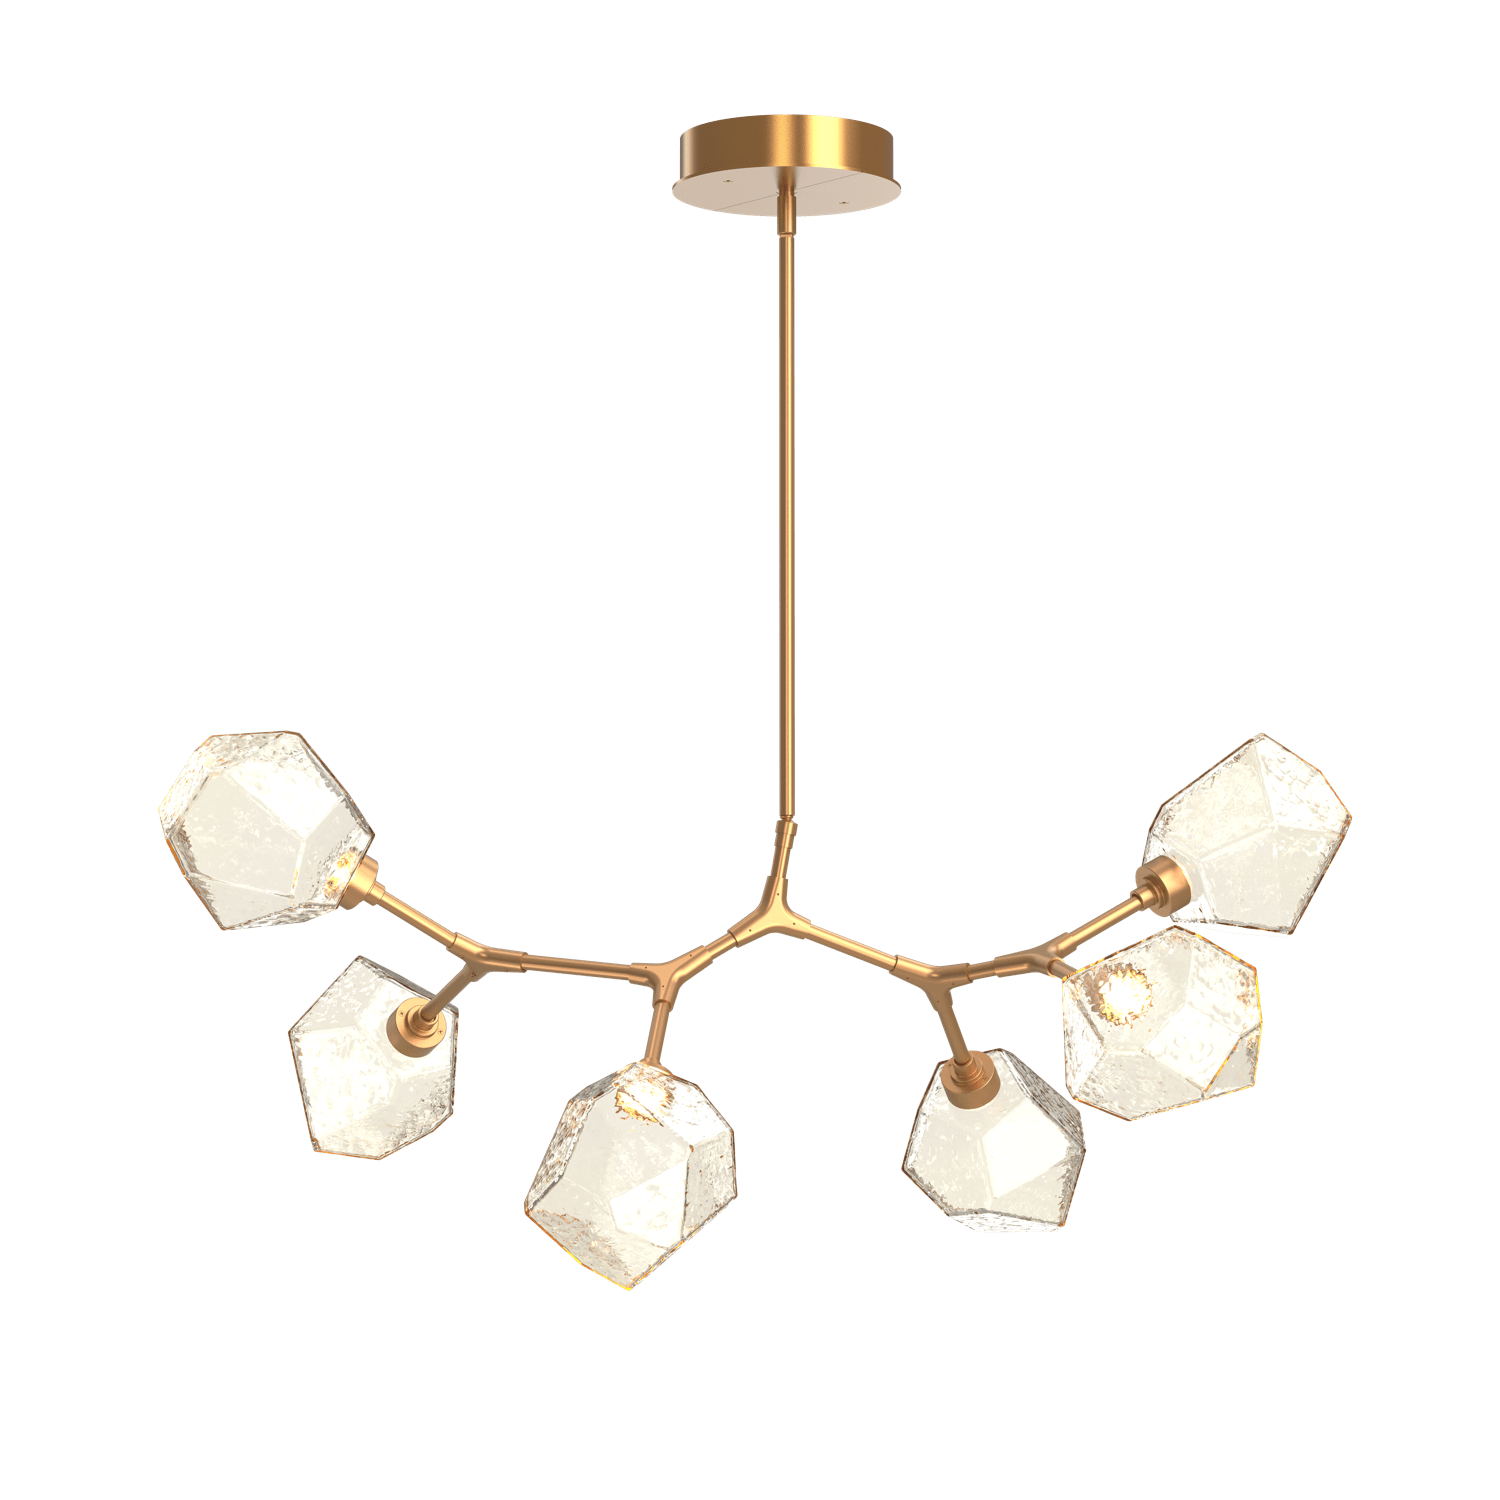 PLB0039-BA-NB-A-Hammerton-Studio-Gem-6-light-modern-branch-chandelier-with-novel-brass-finish-and-amber-blown-glass-shades-and-LED-lamping